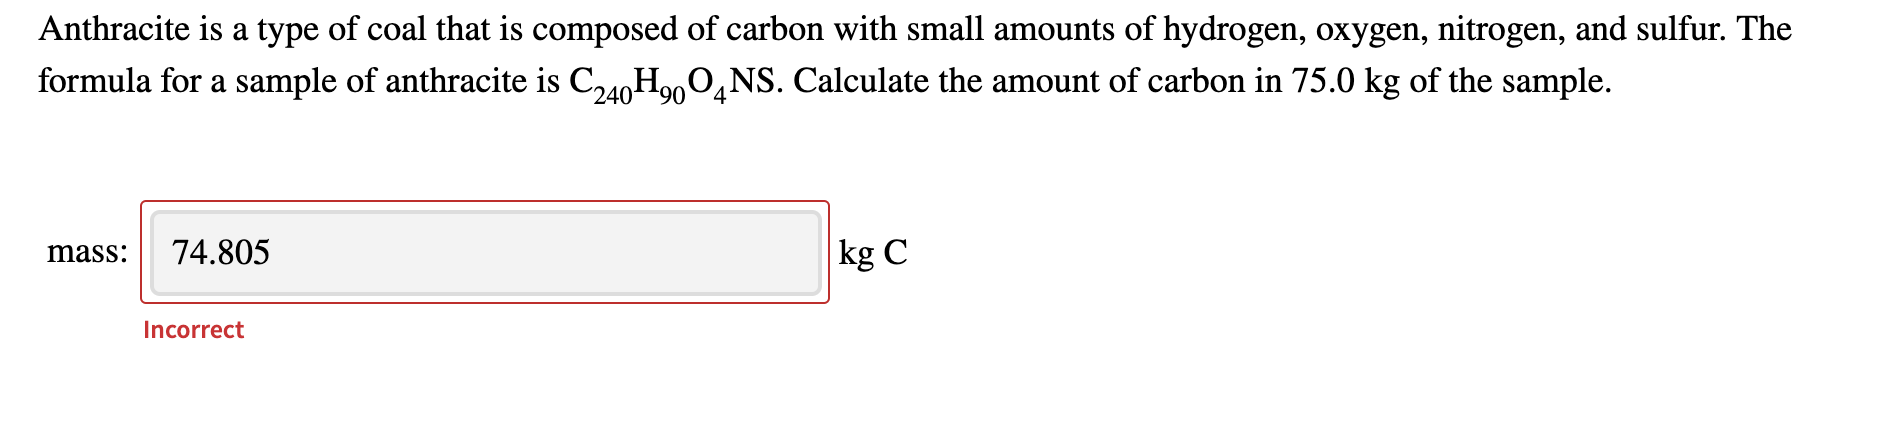 Anthracite is a type of coal that is composed of carbon with small amounts of hydrogen, oxygen, nitrogen, and sulfur. The
formula for a sample of anthracite is C,40HonO.NS. Calculate the amount of carbon in 75.0 kg of the sample.
74.805
kg C
mass:
Incorrect
